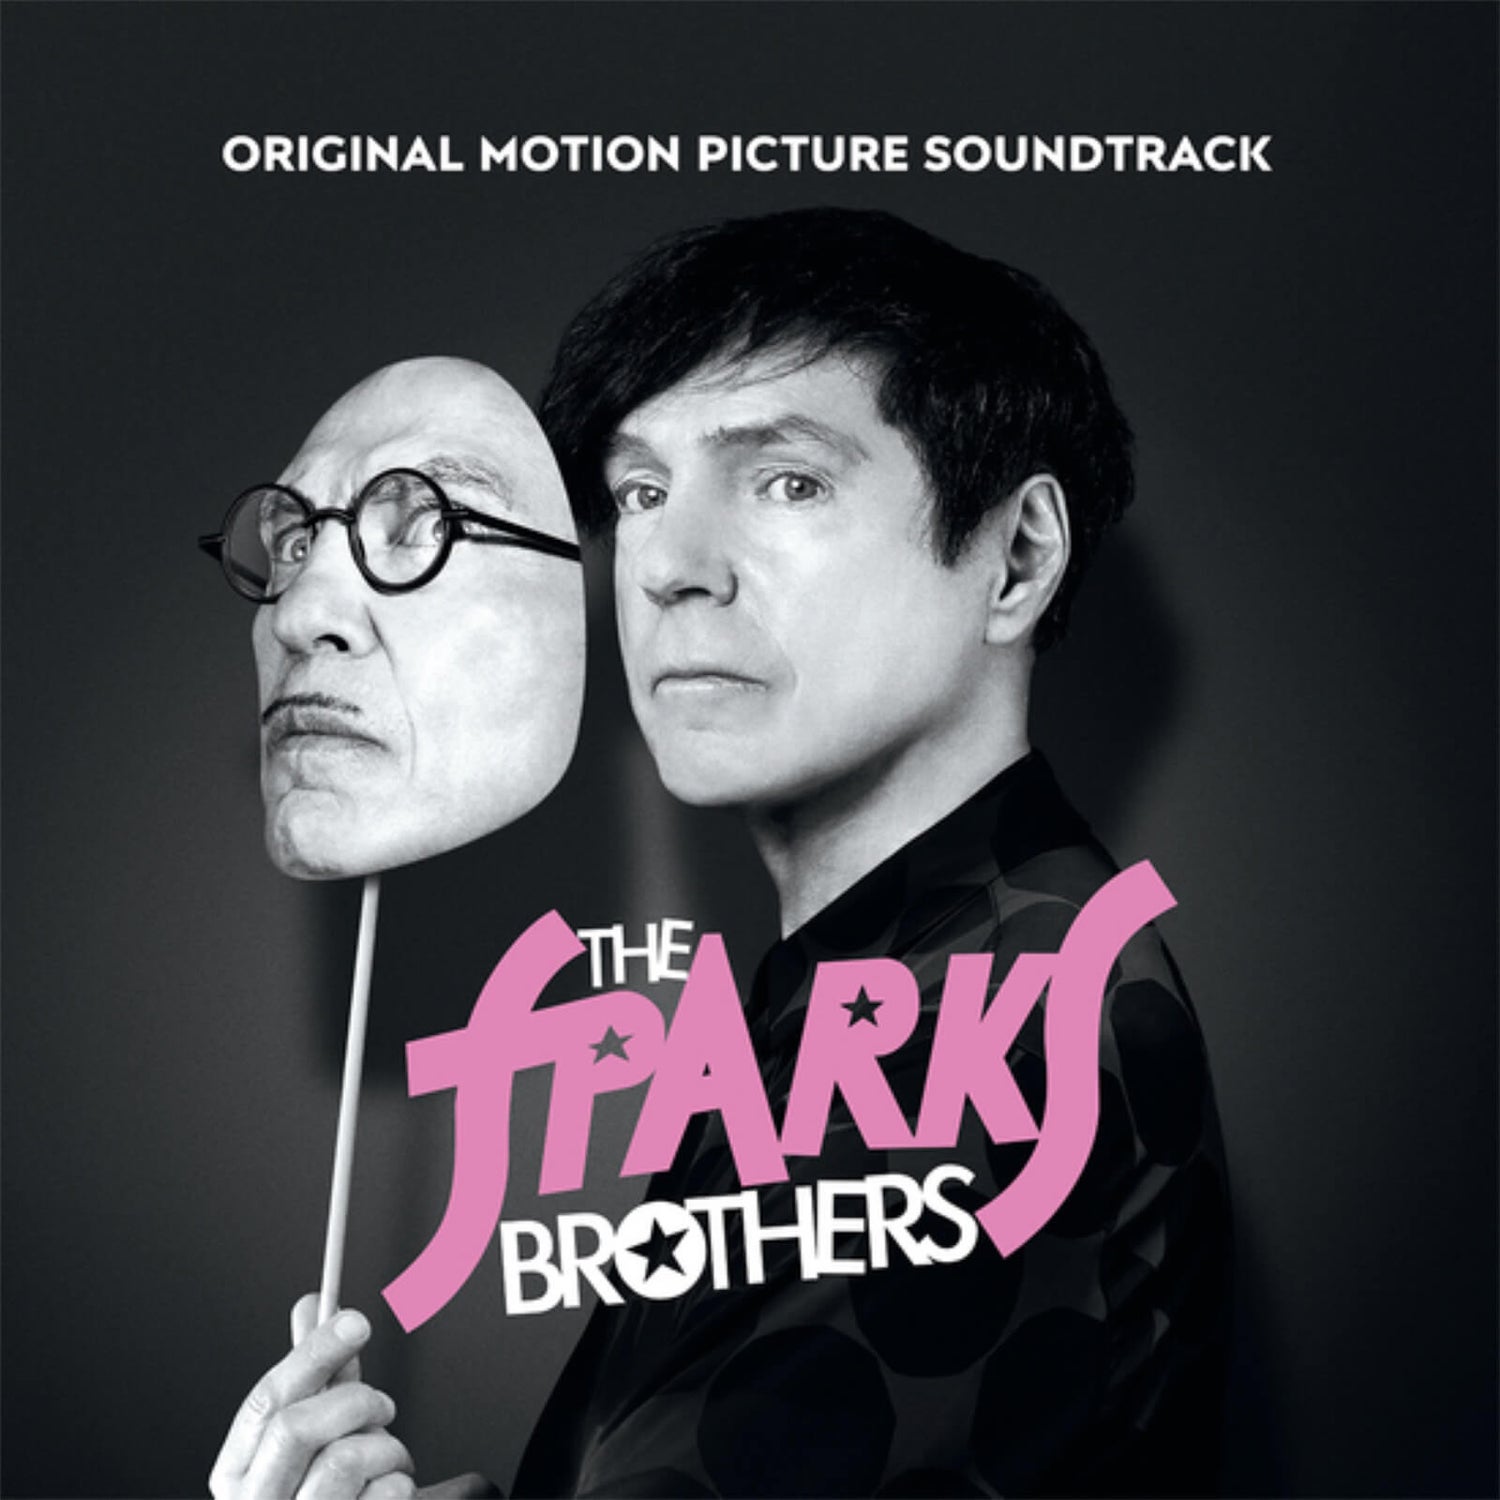 Waxwork - The Sparks Brothers (Original Motion Picture Soundtrack) 180g Vinyl Box Set (Pink and Black & White Marble)